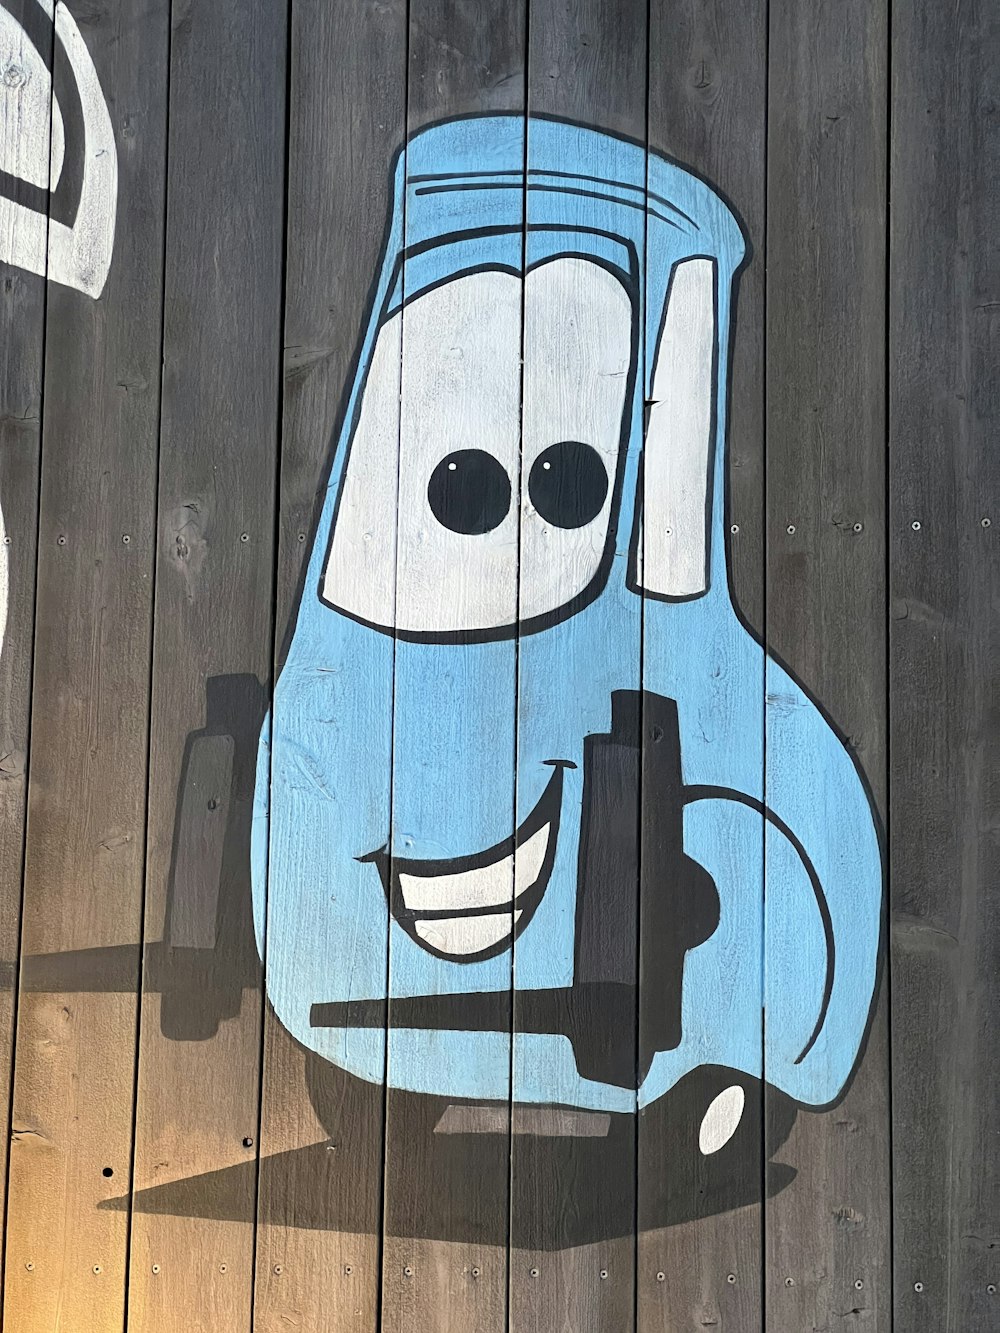 a picture of a cartoon character painted on a wooden fence